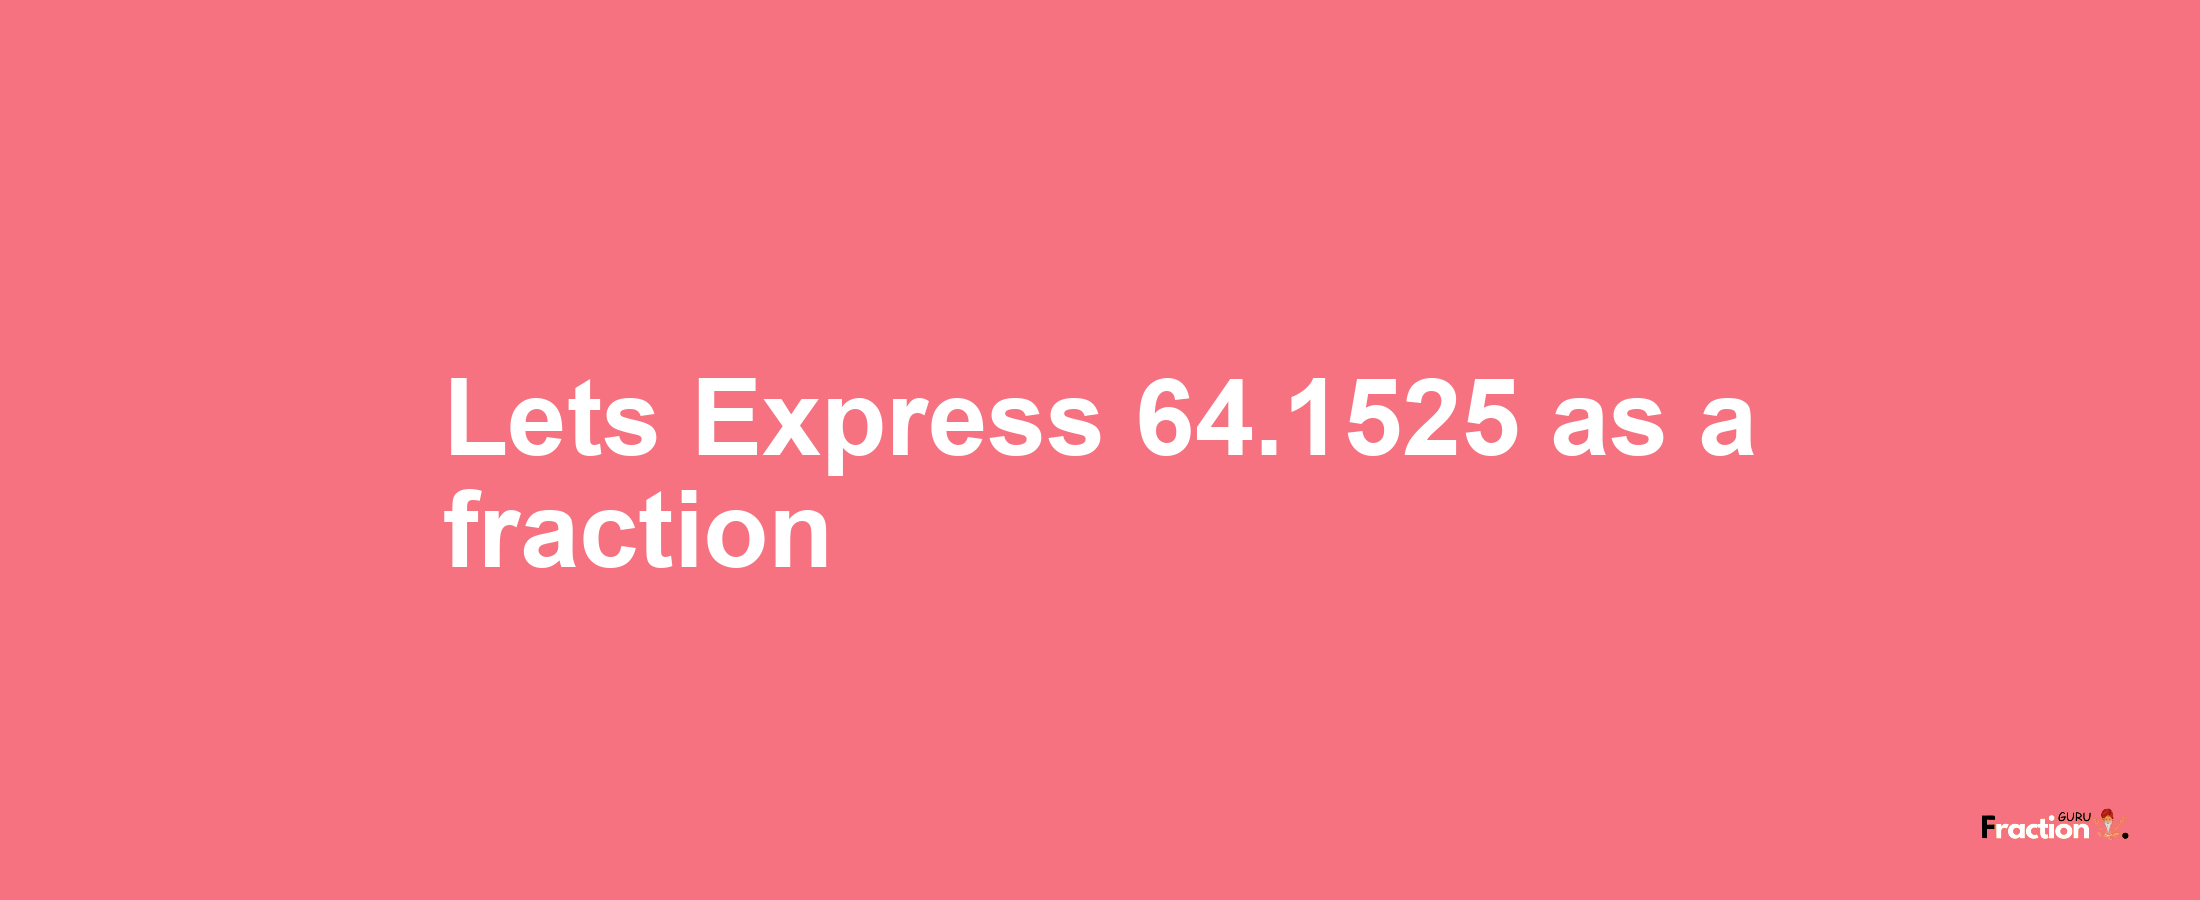 Lets Express 64.1525 as afraction